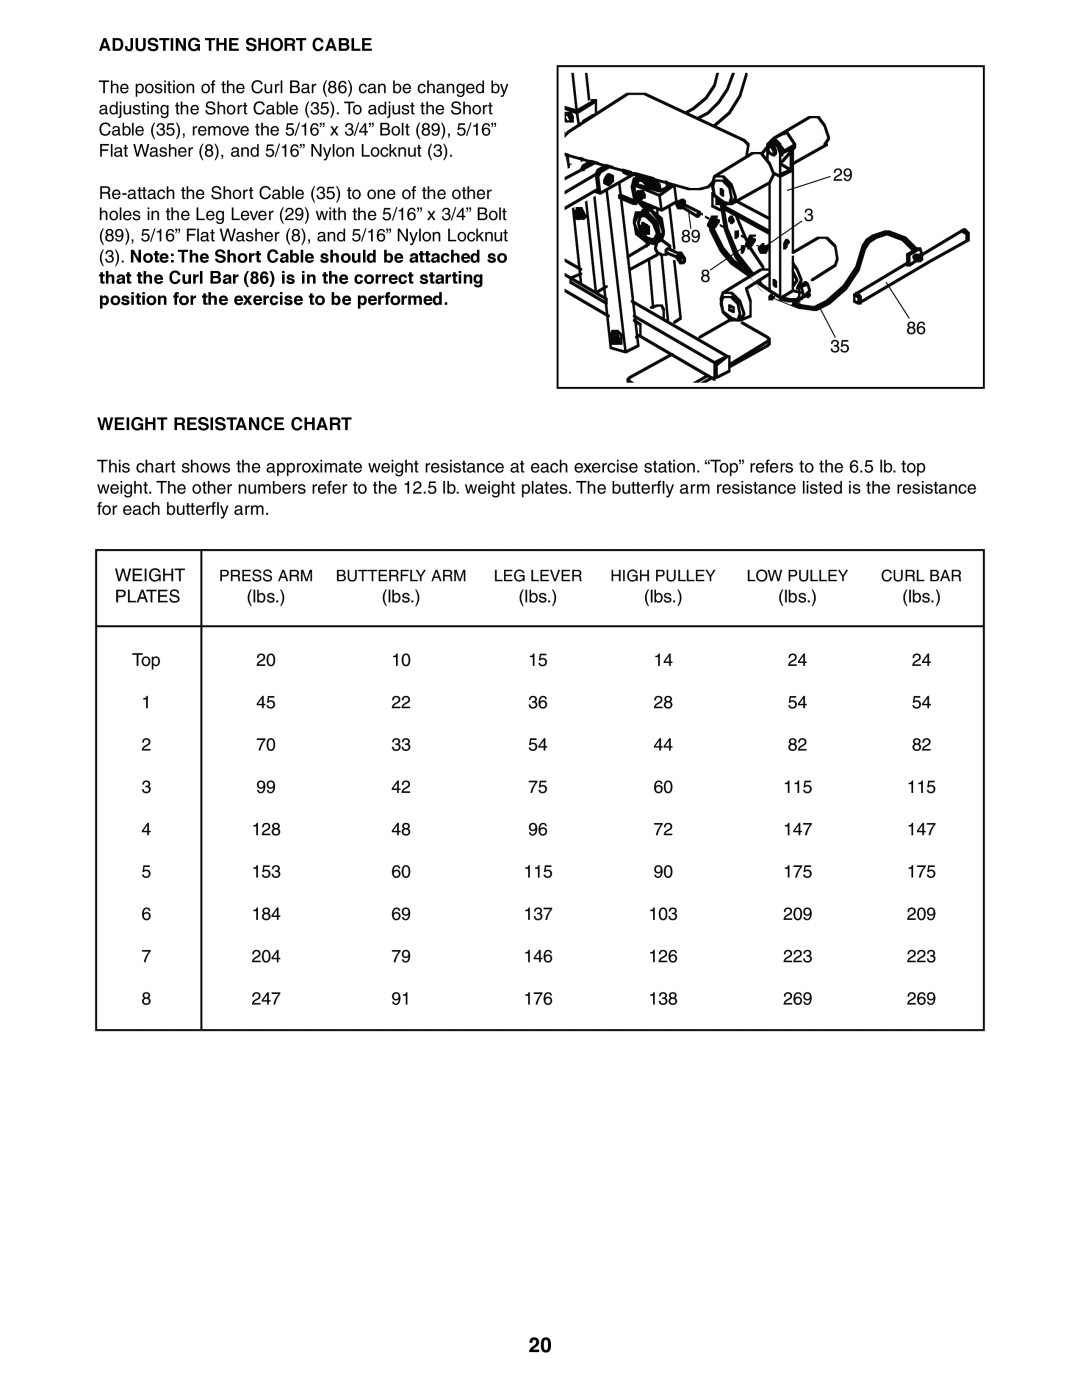 Sears 831.159460 Adjusting The Short Cable, Weight Resistance Chart, Press Arm, Butterfly Arm, Leg Lever, High Pulley 